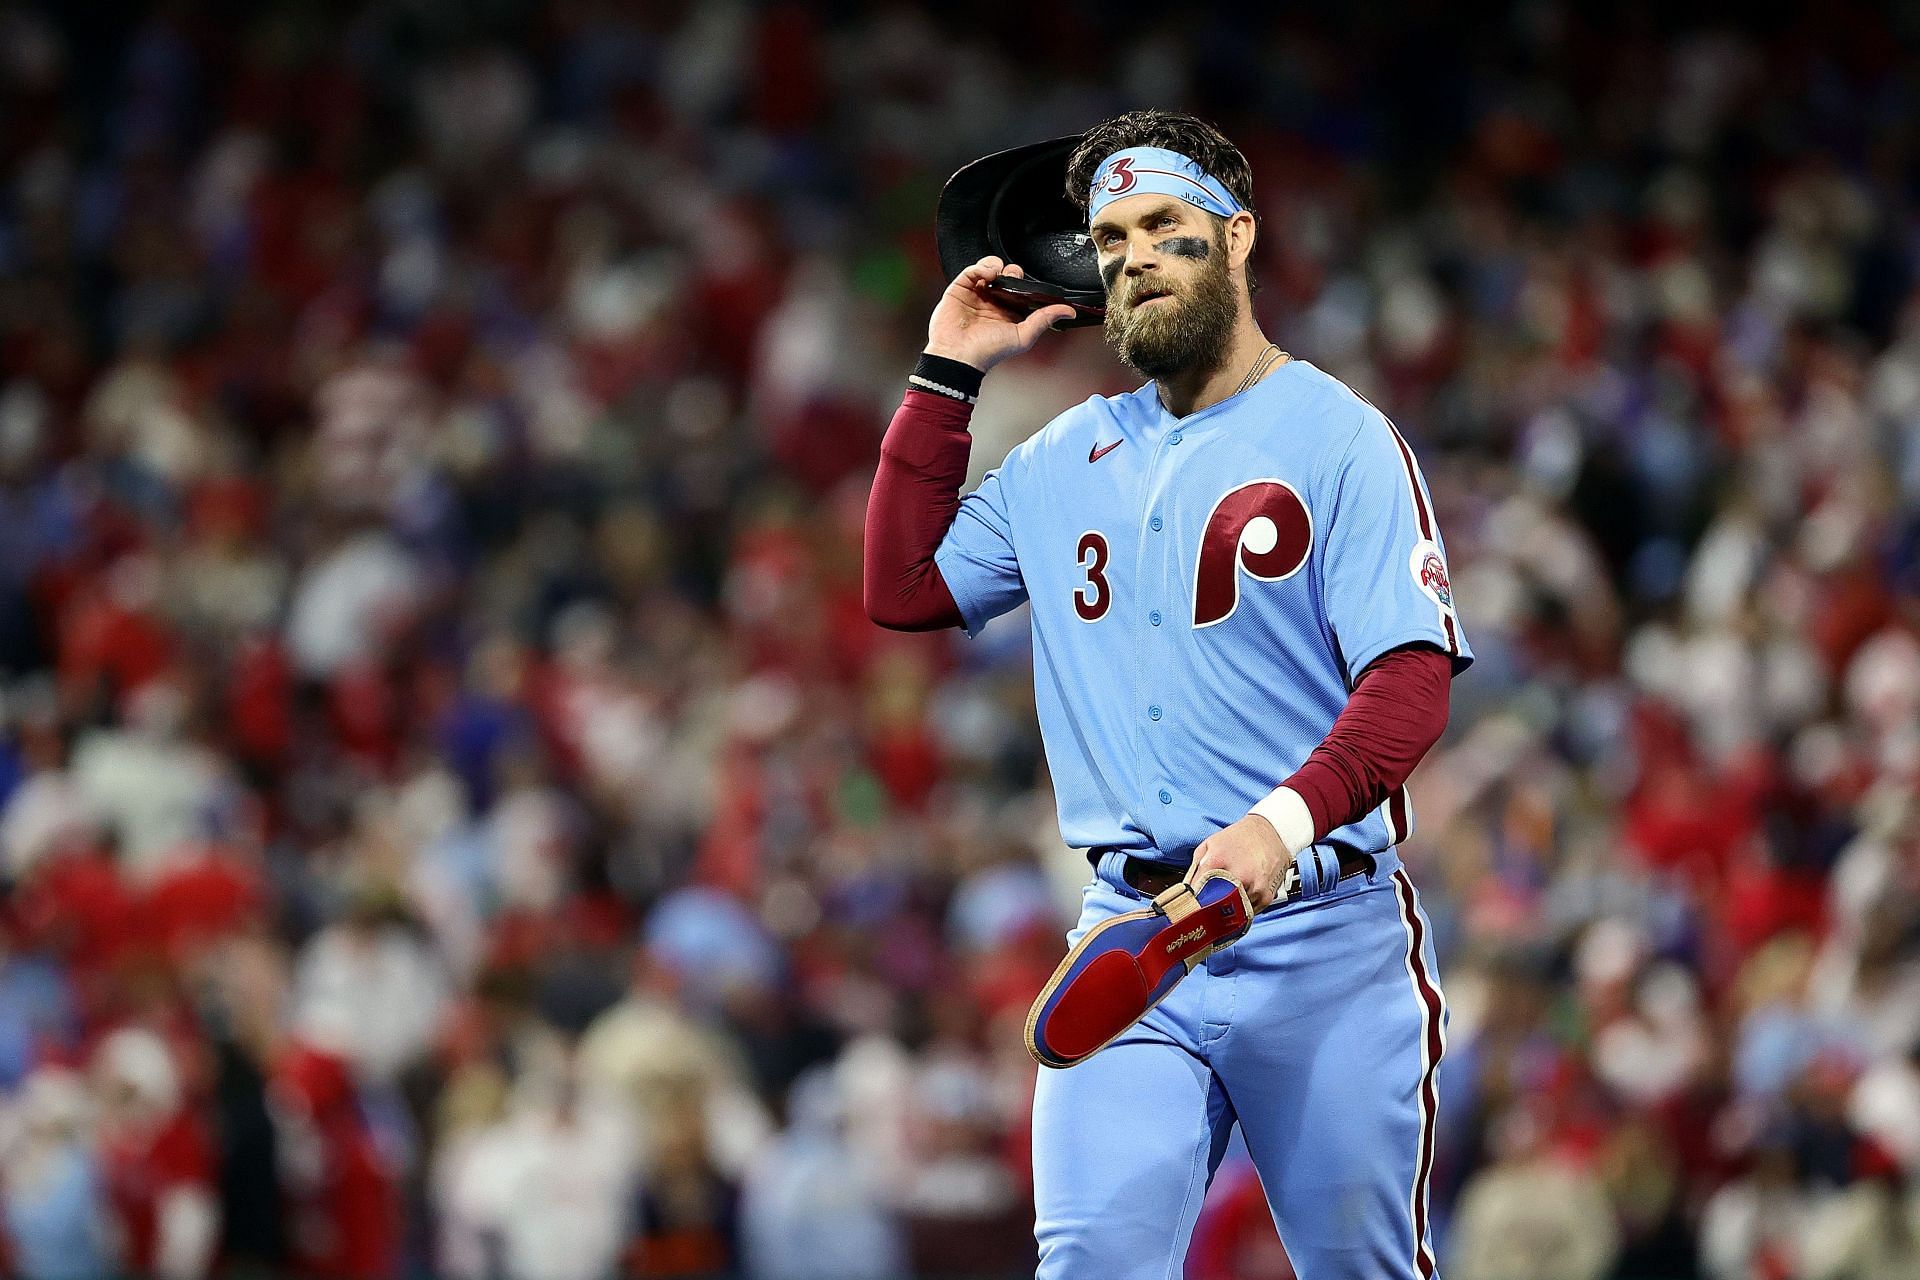 See images from the Phillies' loss to the Astros to end the World Series in  Game 6